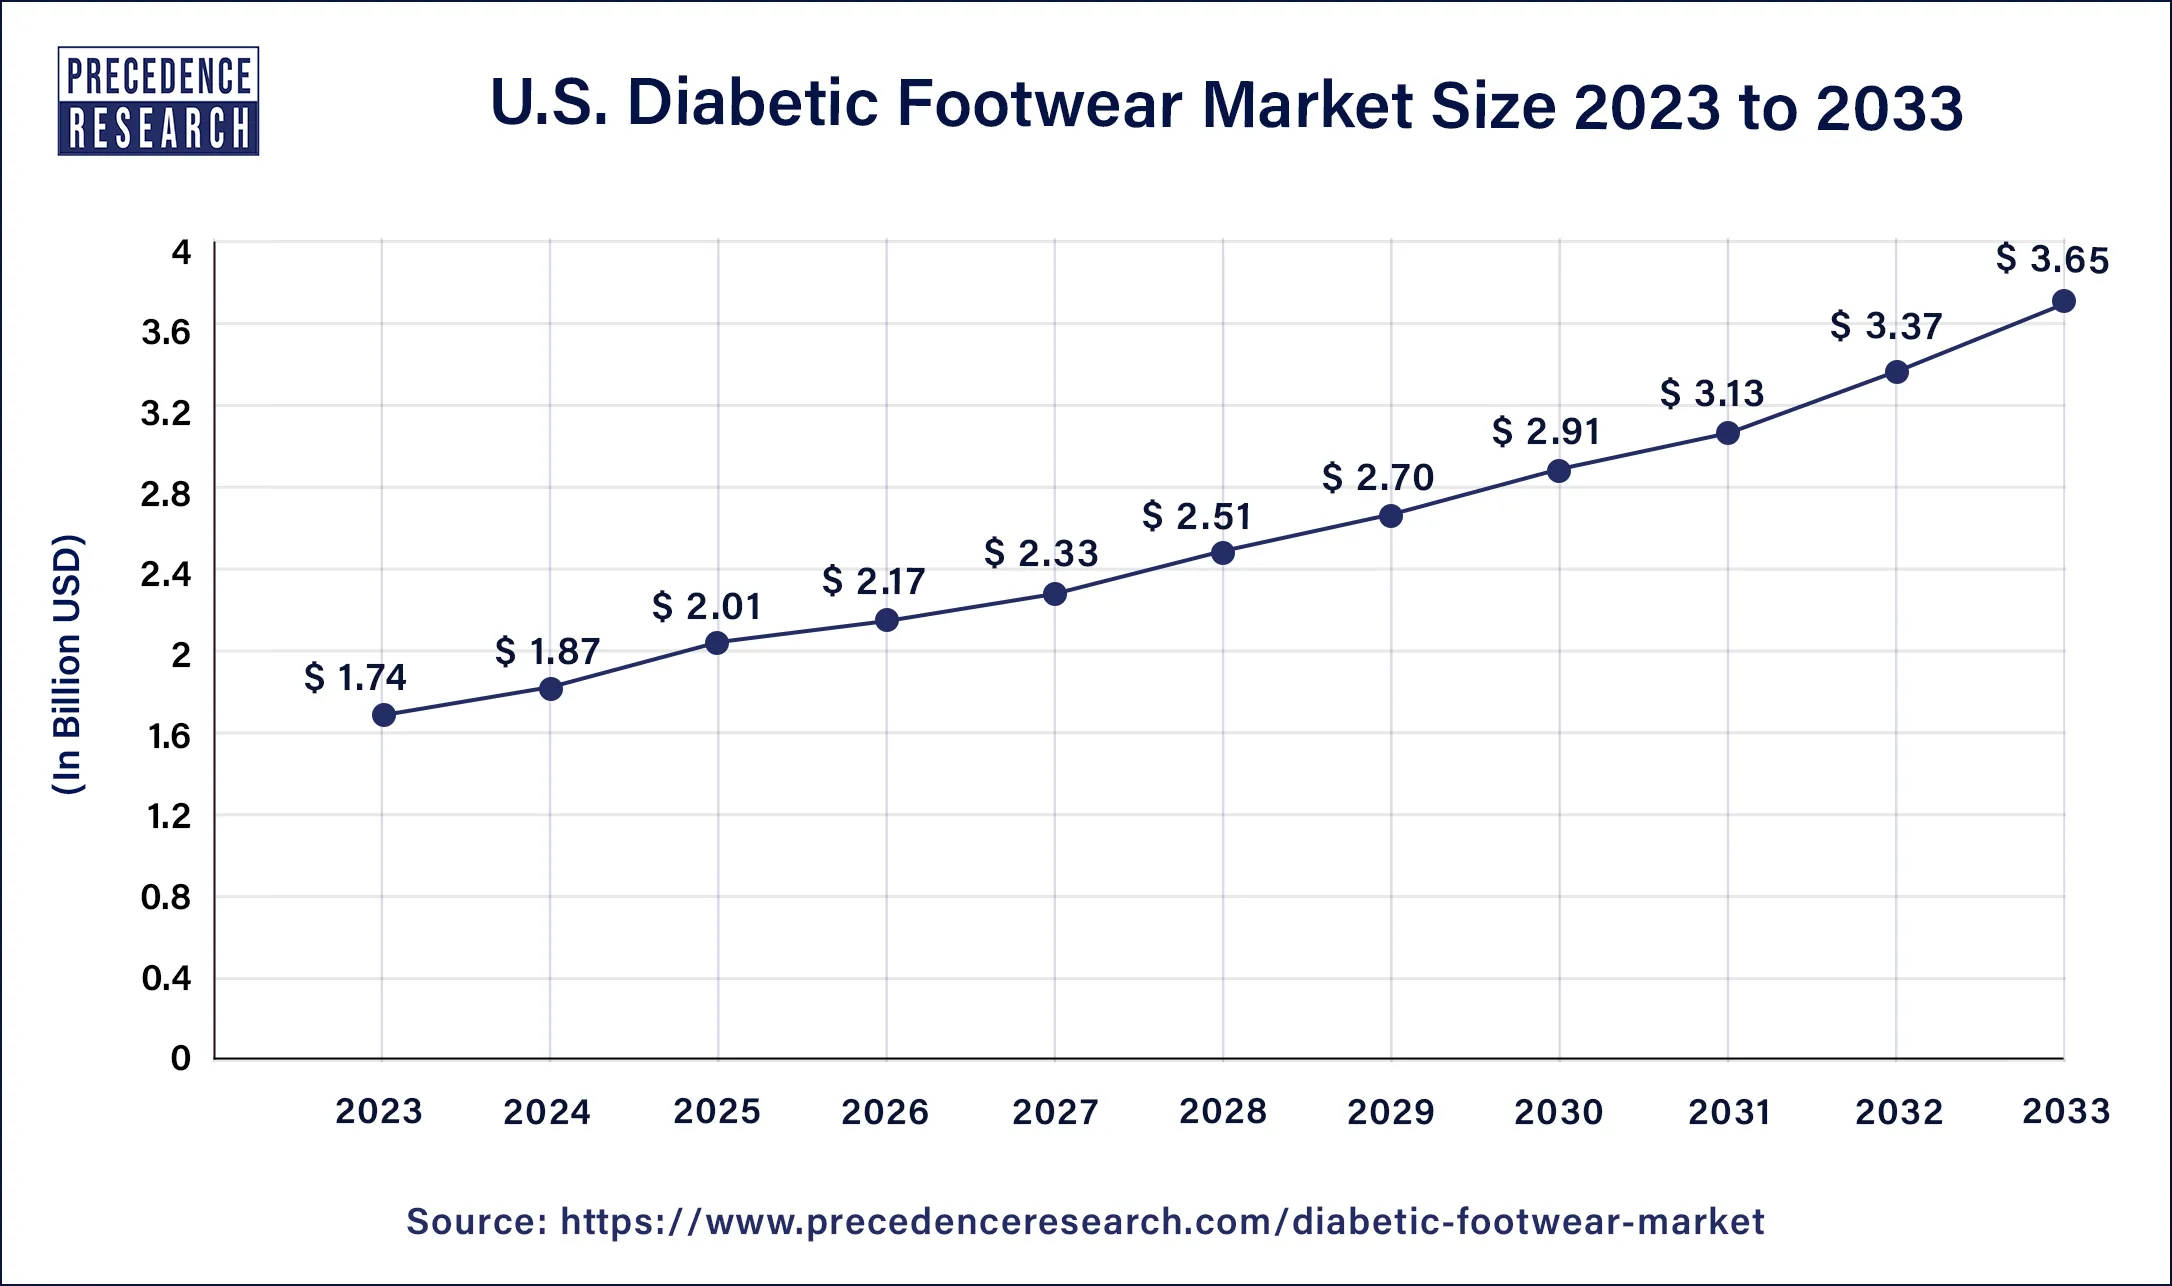 Asia PAcific Diabetic Footwear Market Size 2024 to 2033